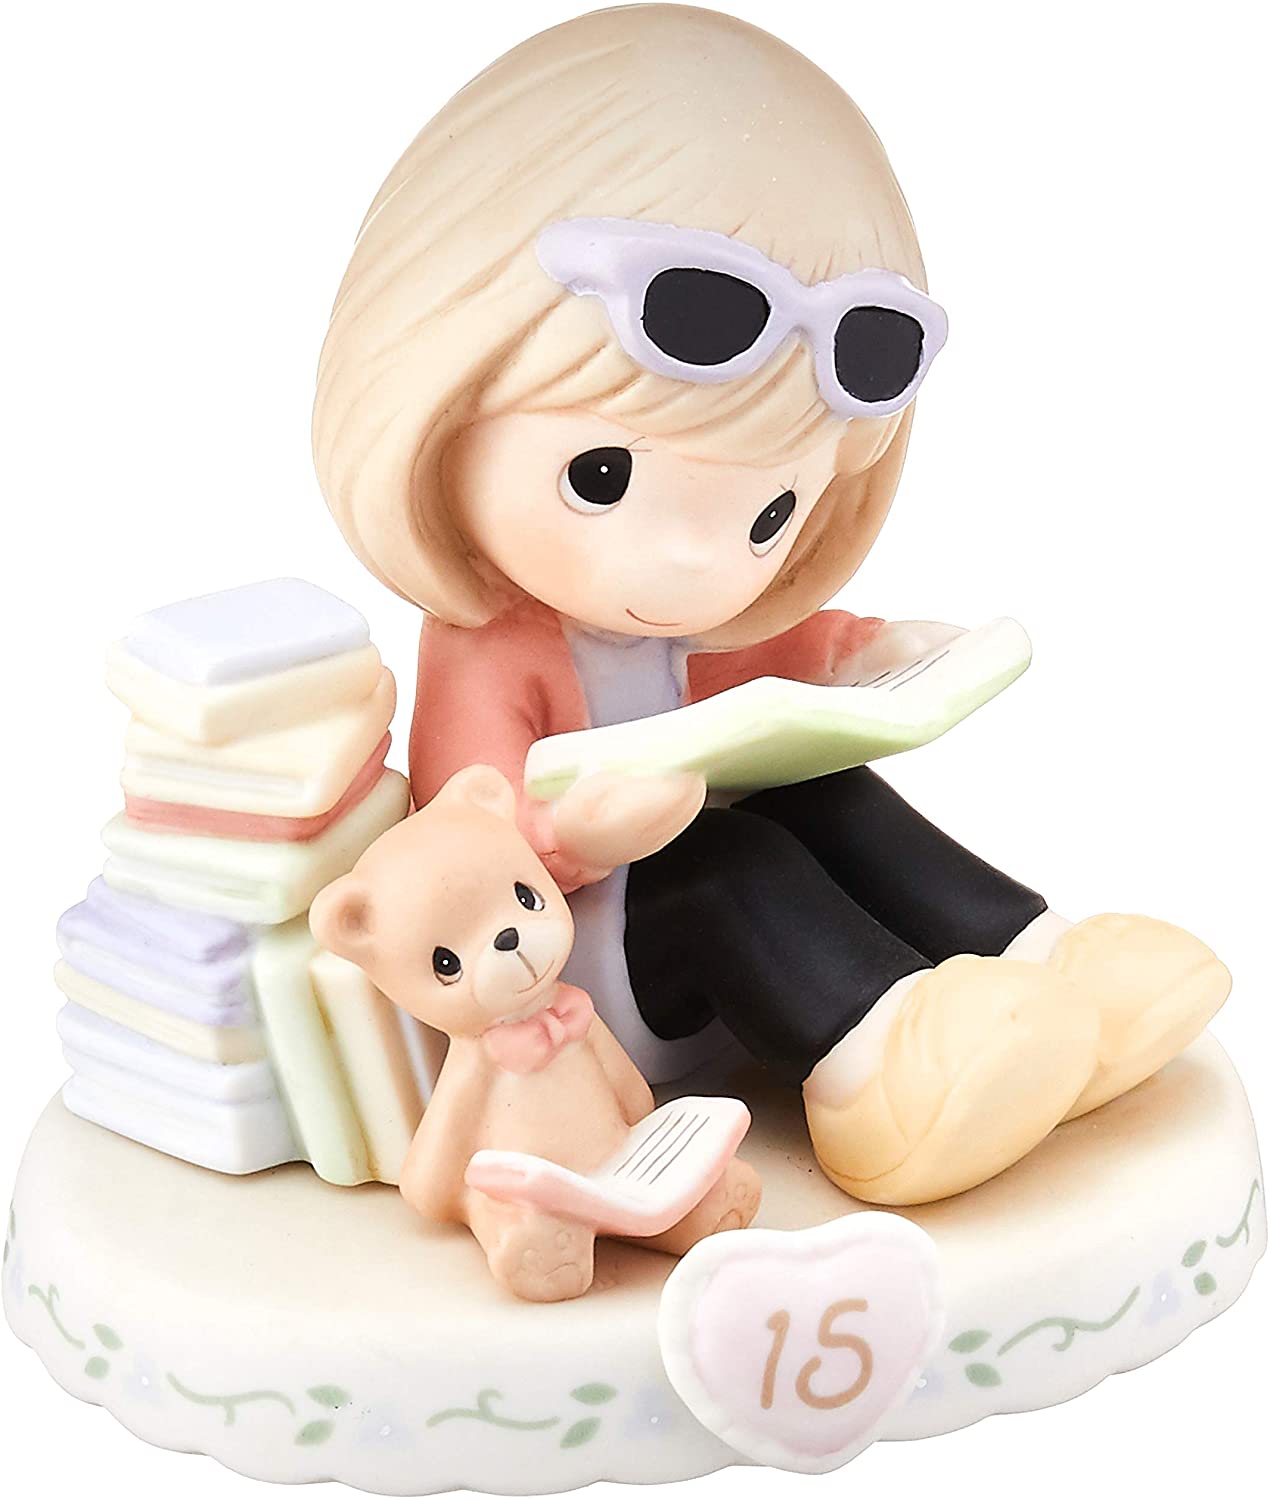 Precious Moments  Girl Growing In Grace, Age 15 Birthday Bisque Porcelain Figurine